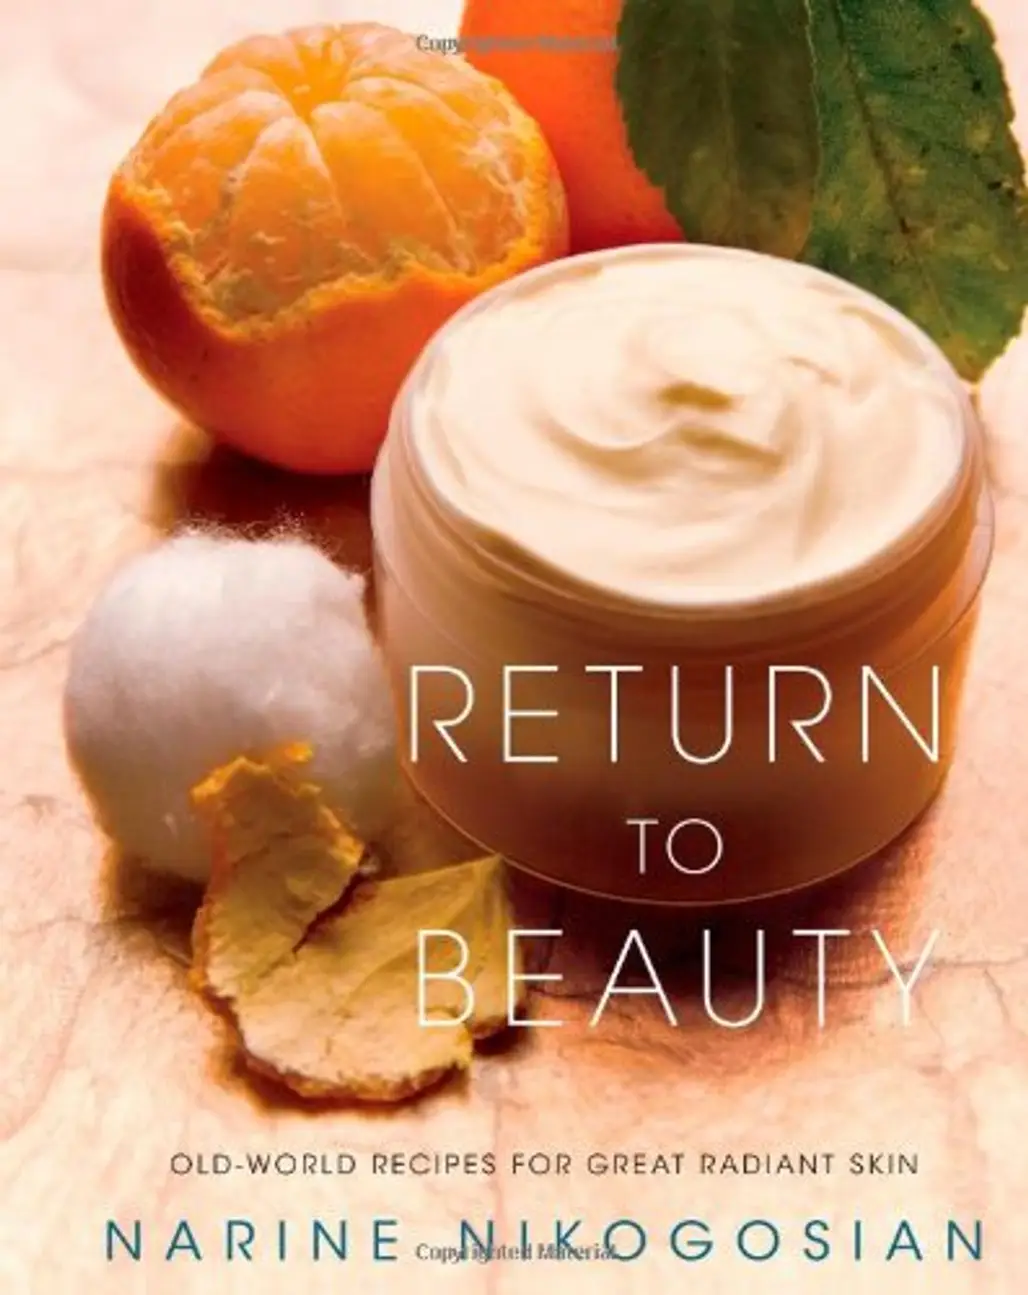 Return to Beauty: Old-World Recipes for Great Radiant Skin